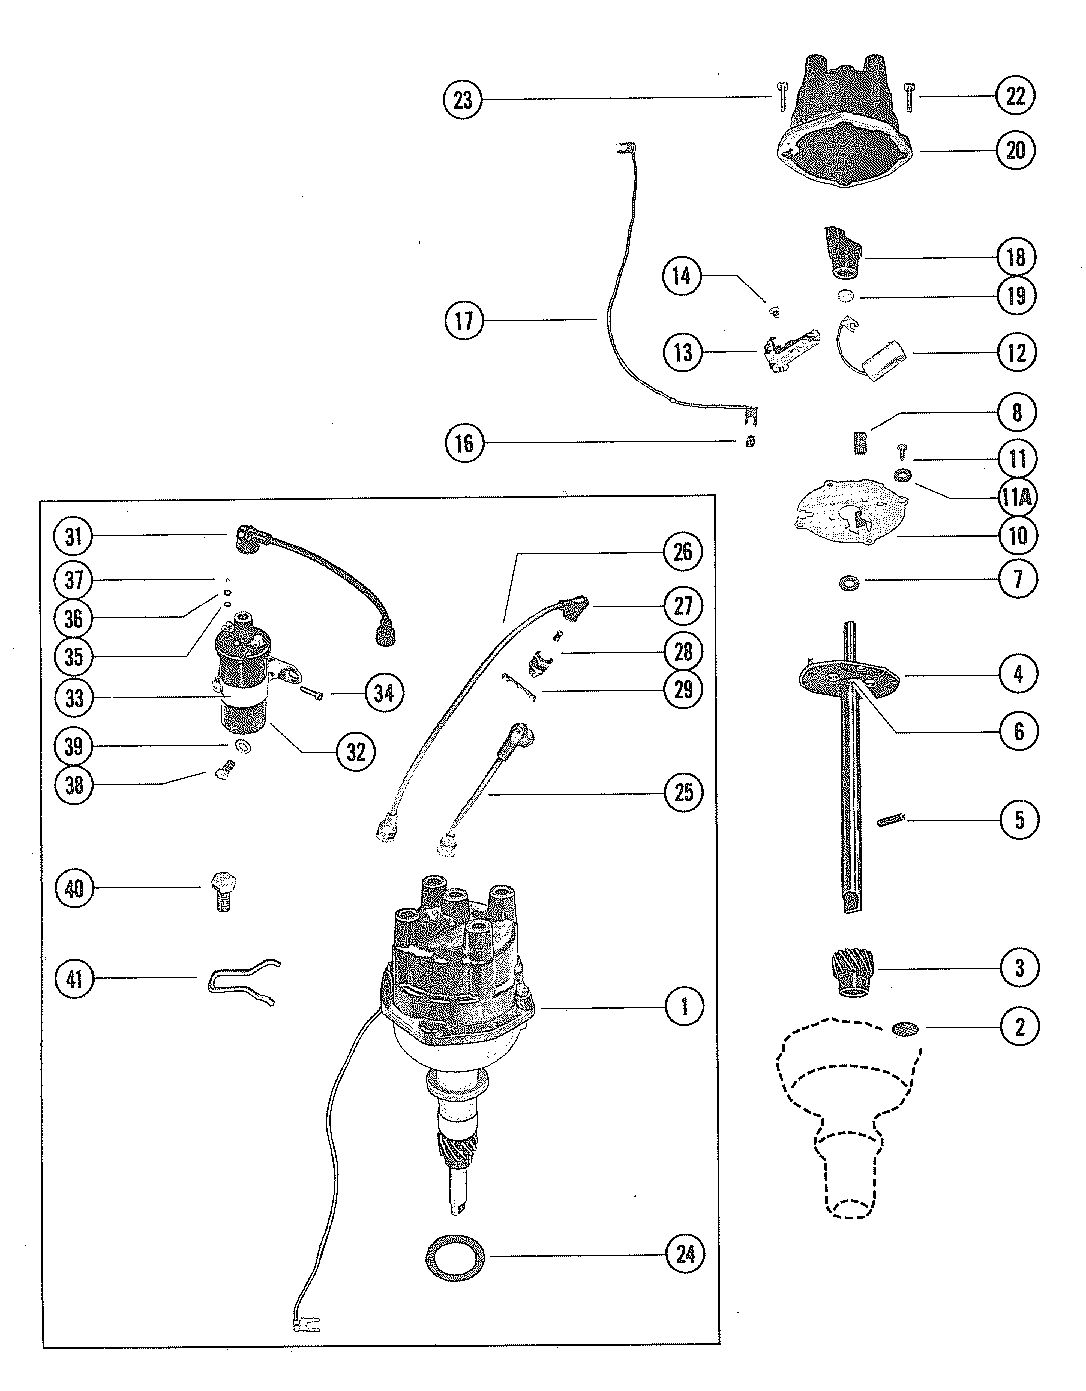 MERCRUISER 140 ENGINE DISTRIBUTOR ASSEMBLY AND COIL